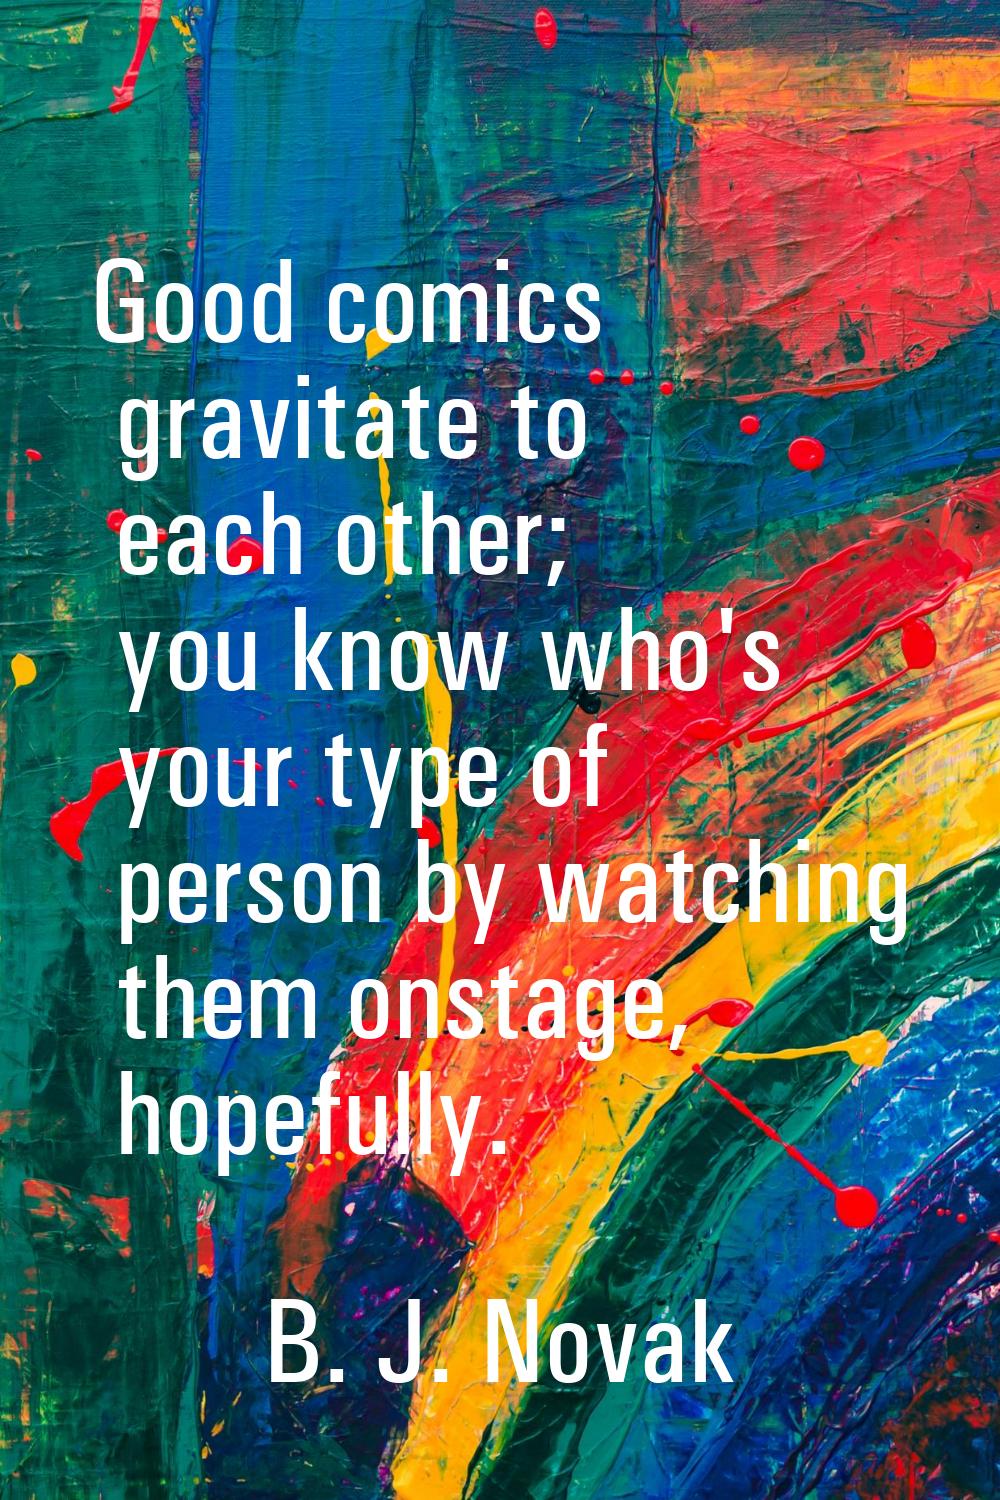 Good comics gravitate to each other; you know who's your type of person by watching them onstage, h